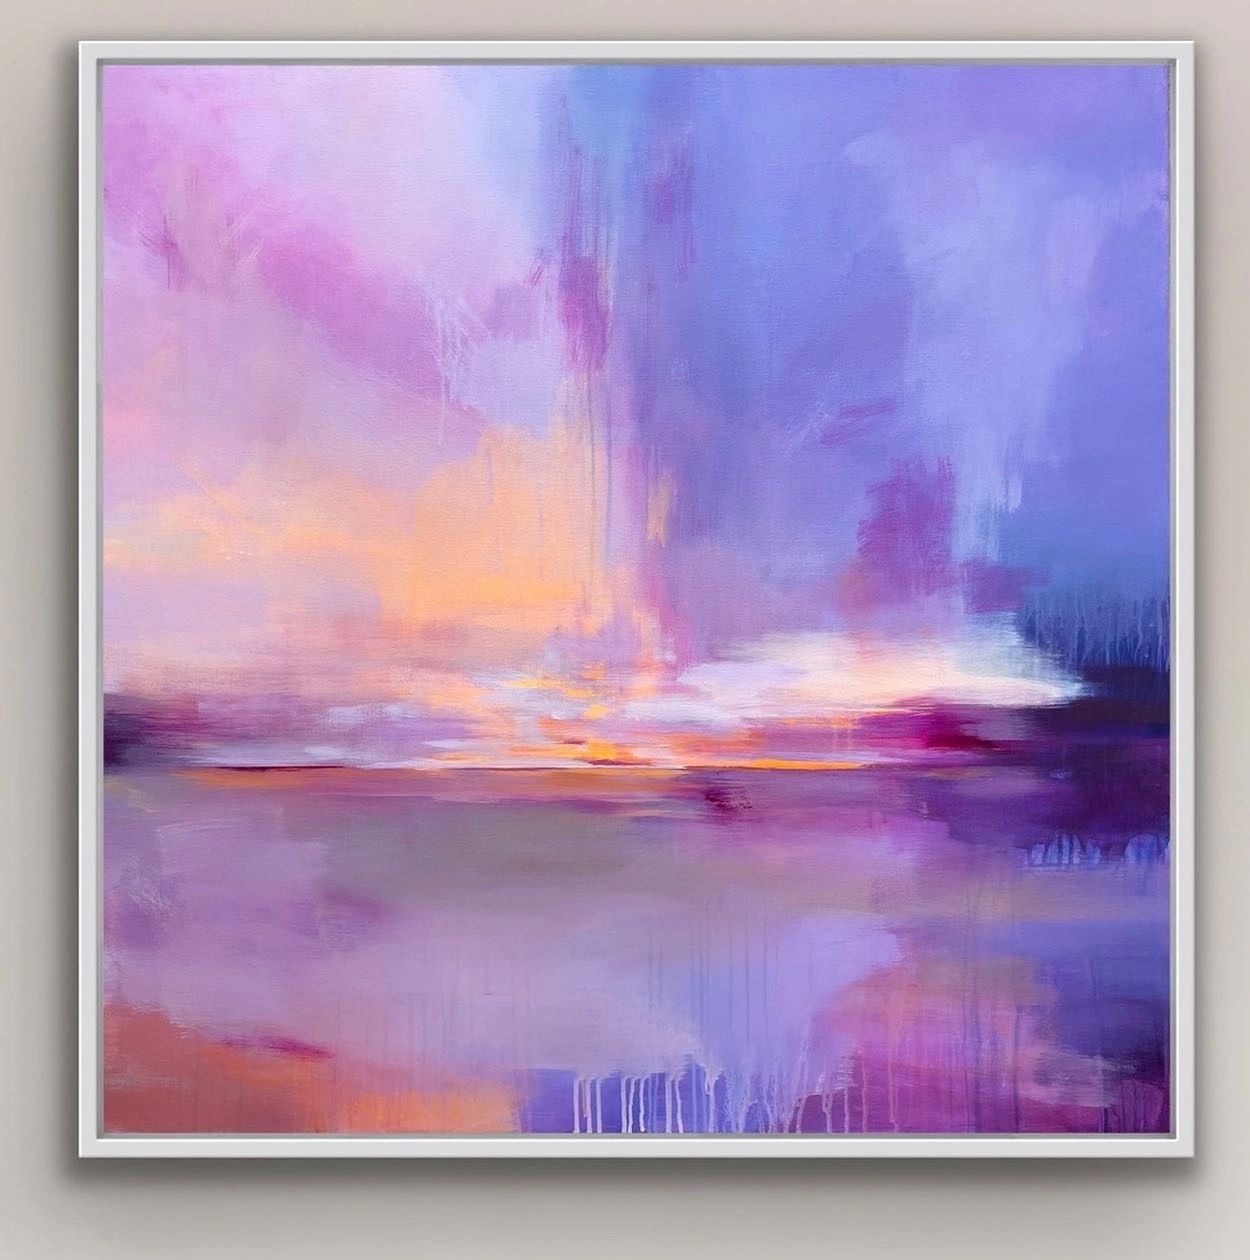 
A large expressive abstract painting inspired by sunrise on the east coast.